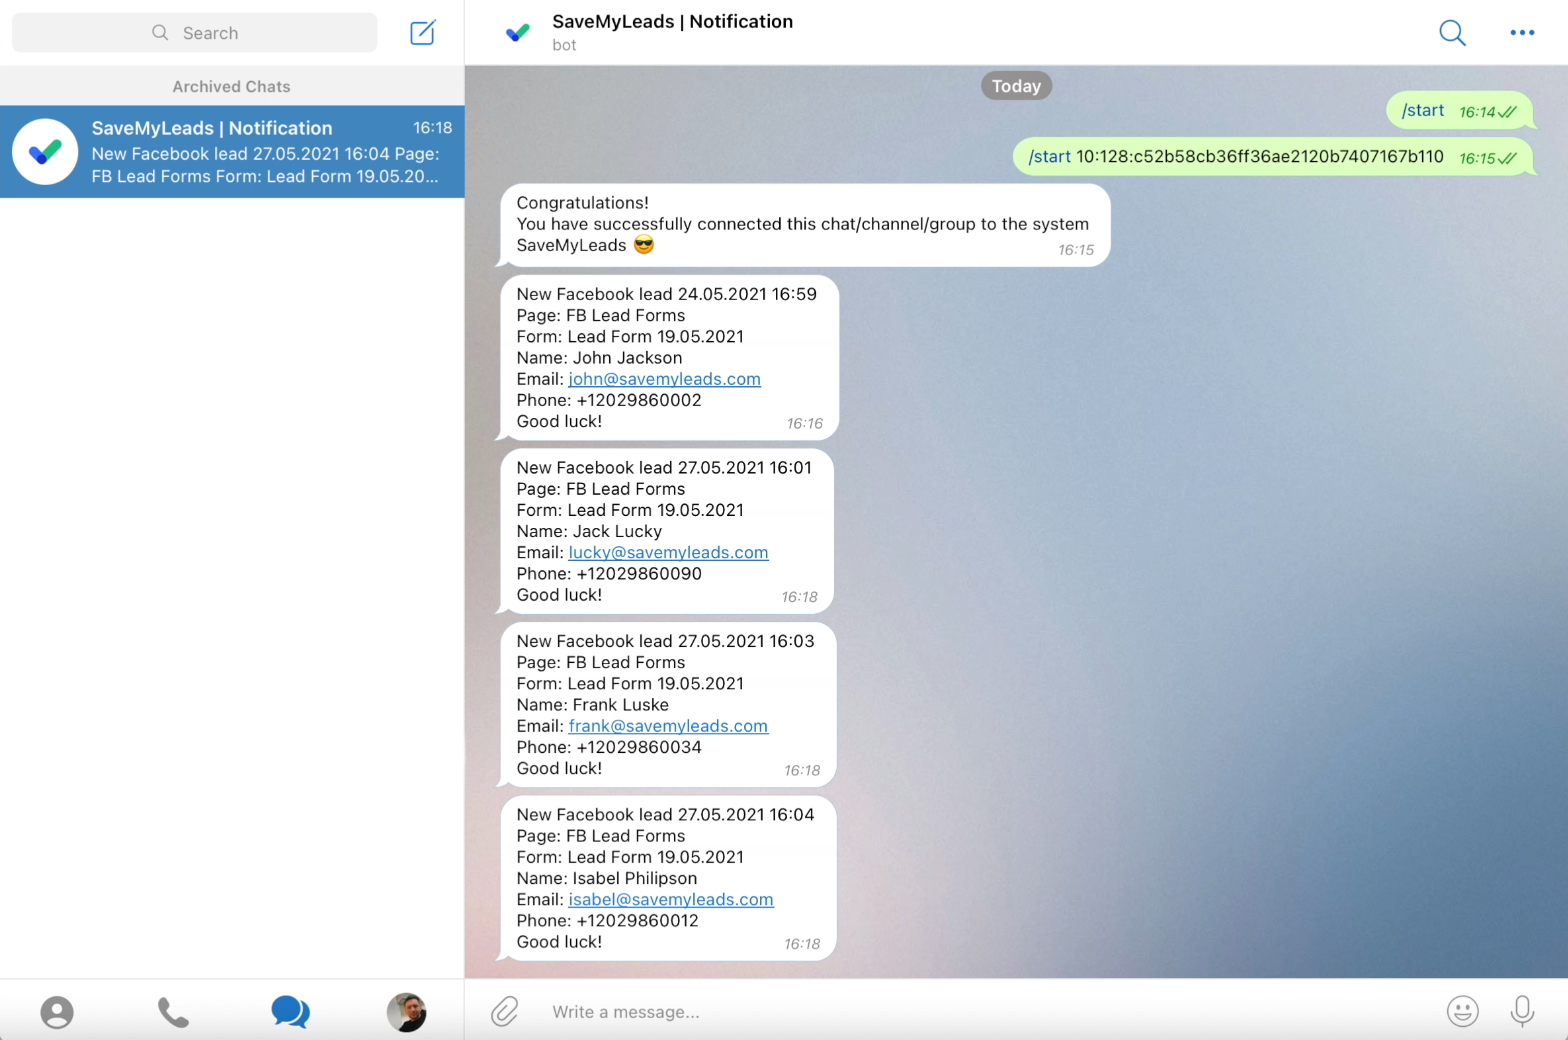 How to set up the upload of new leads from a Facebook advertising account in Telegram | Facebook leads sent as Telegram messages